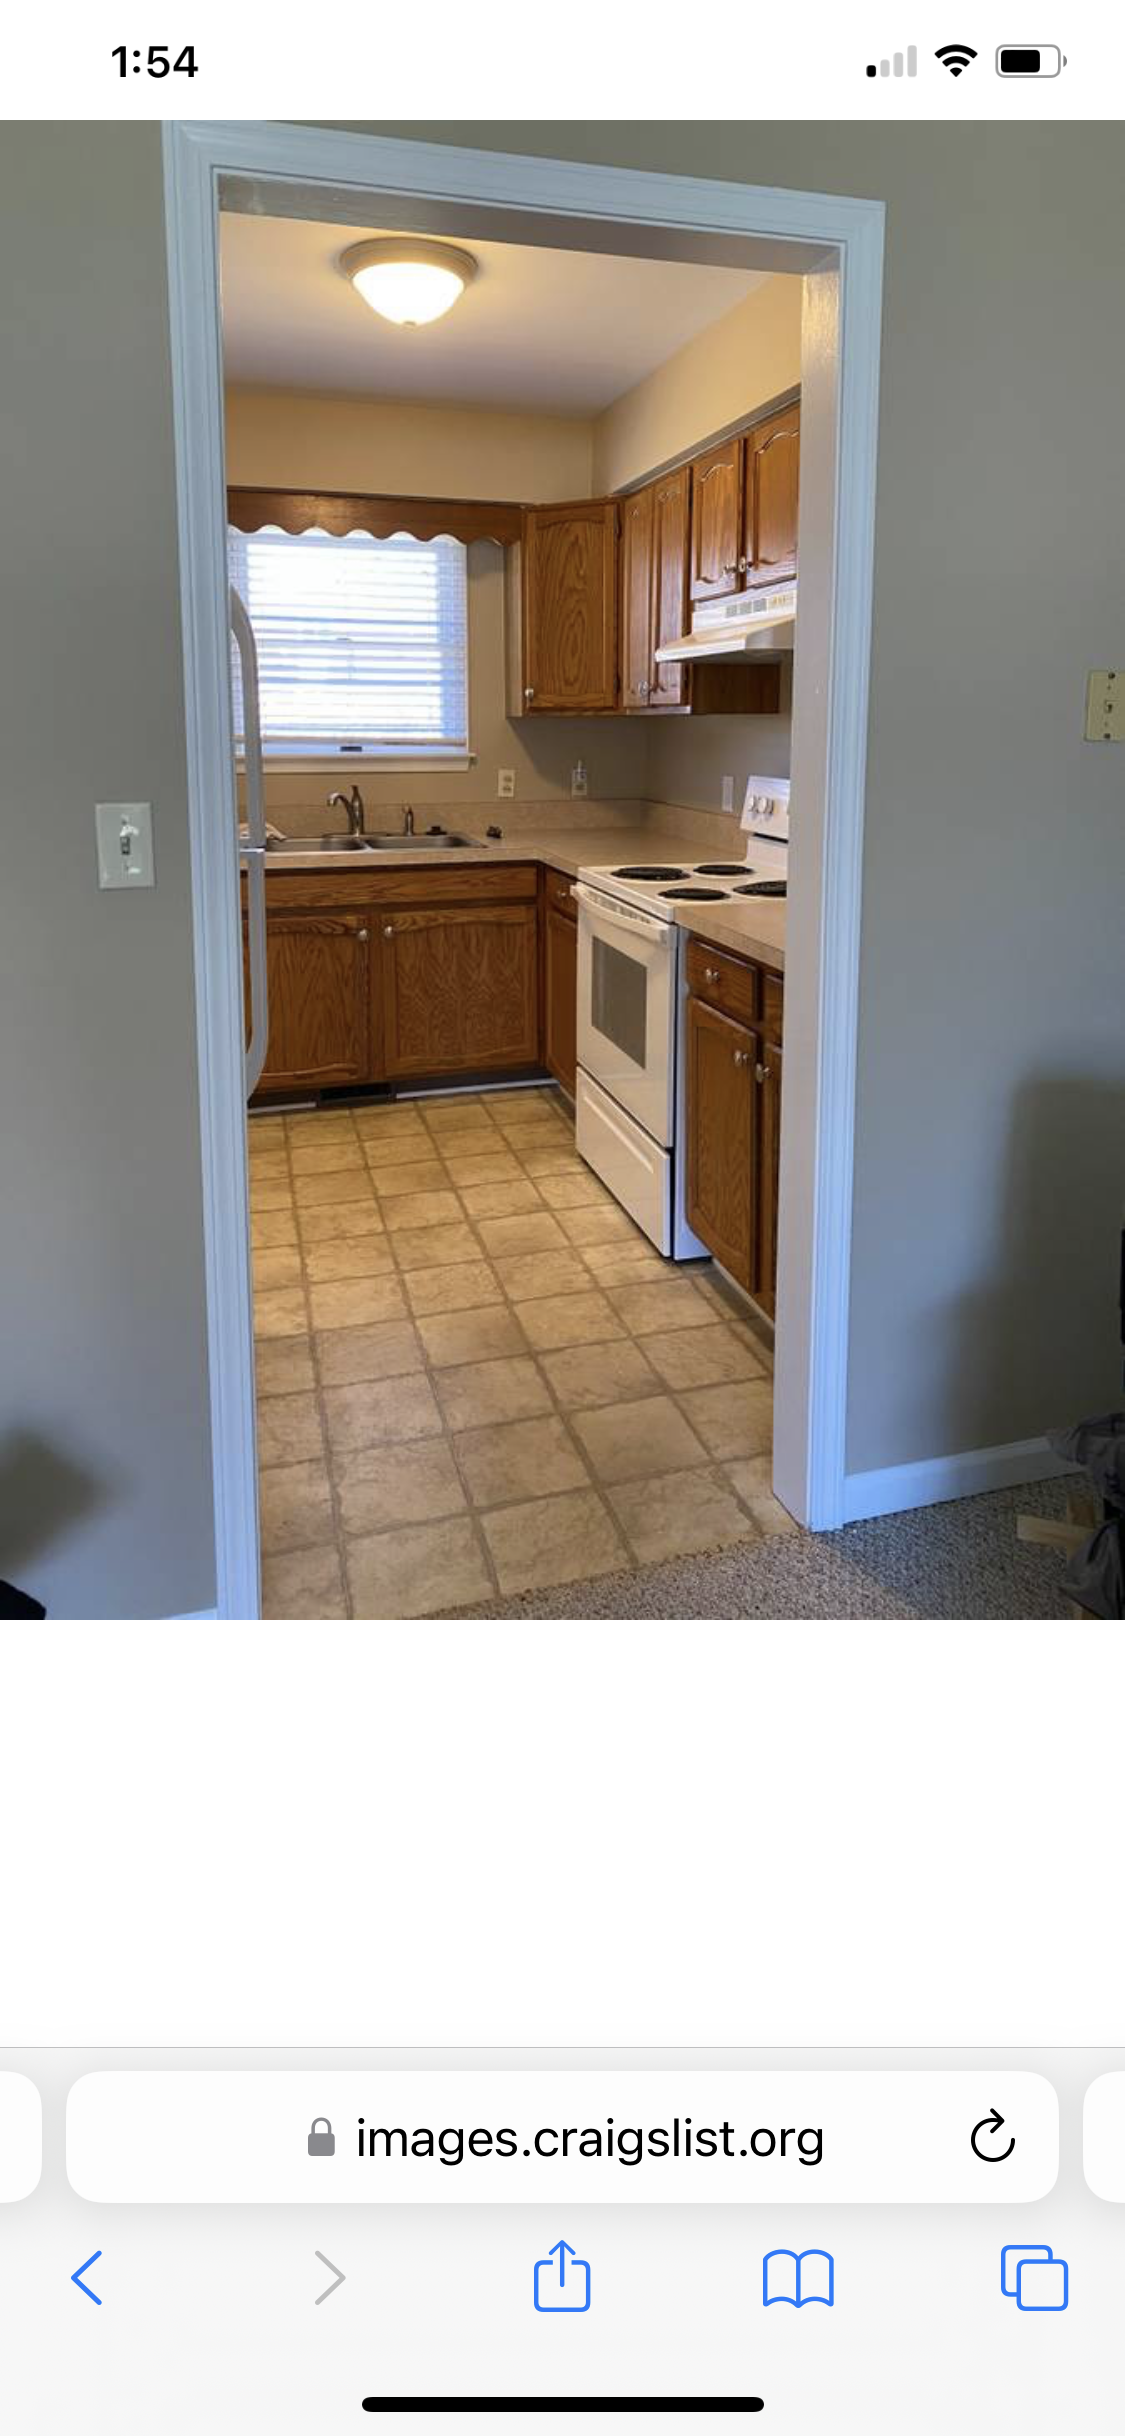 Address not available!, 2 Bedrooms Bedrooms, ,2 BathroomsBathrooms,Condo,For Rent,1434